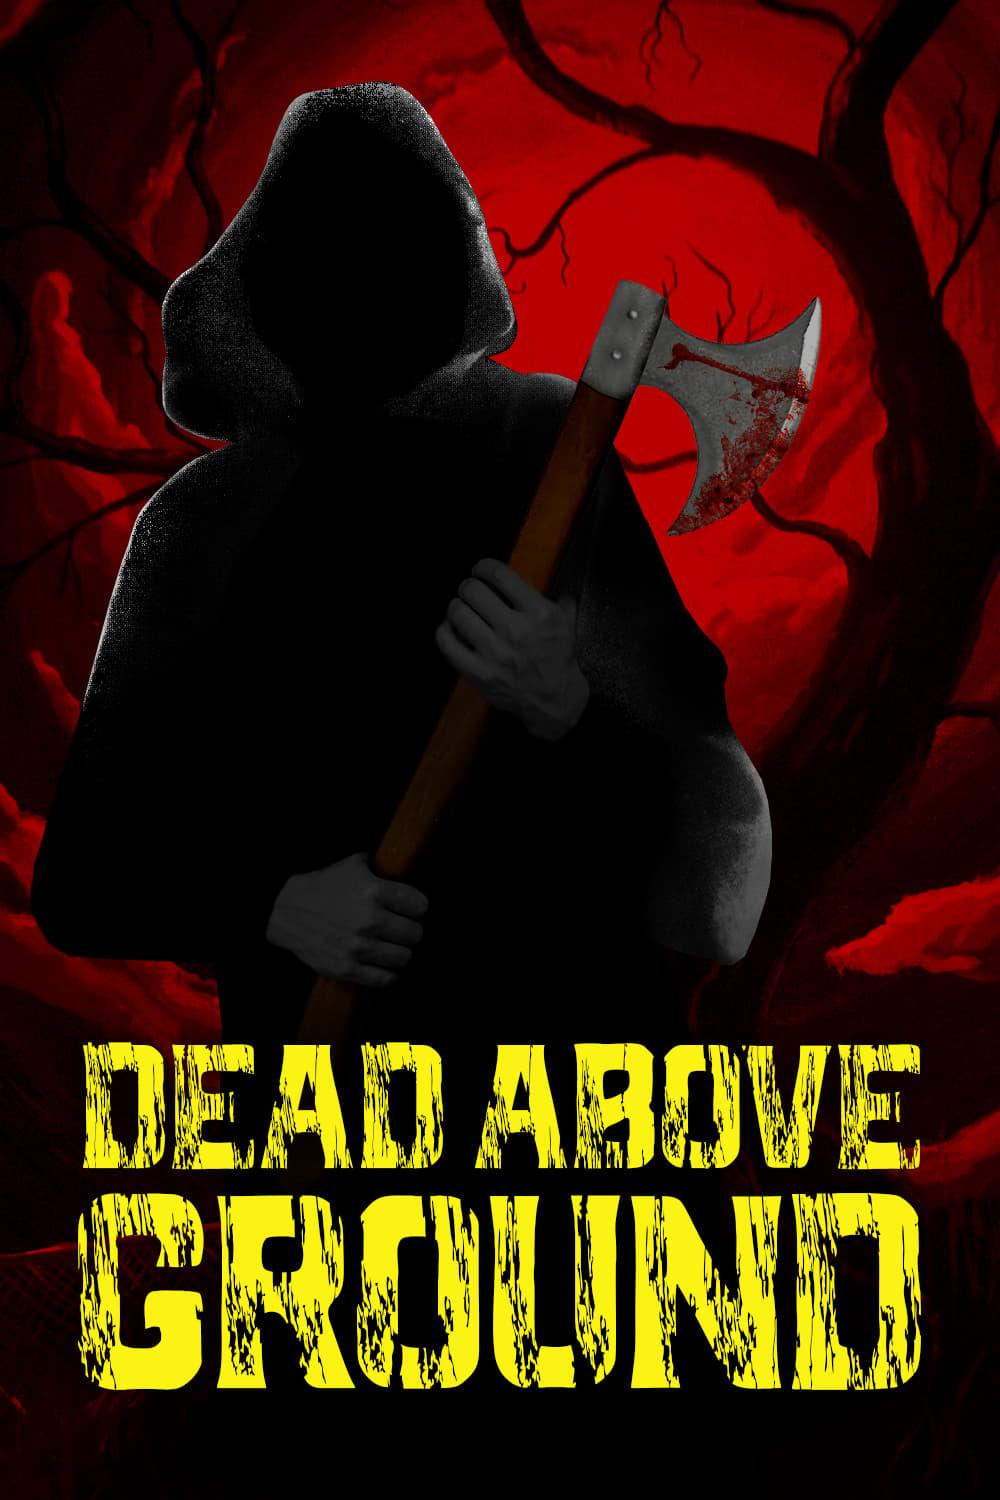 Dead Above Ground poster